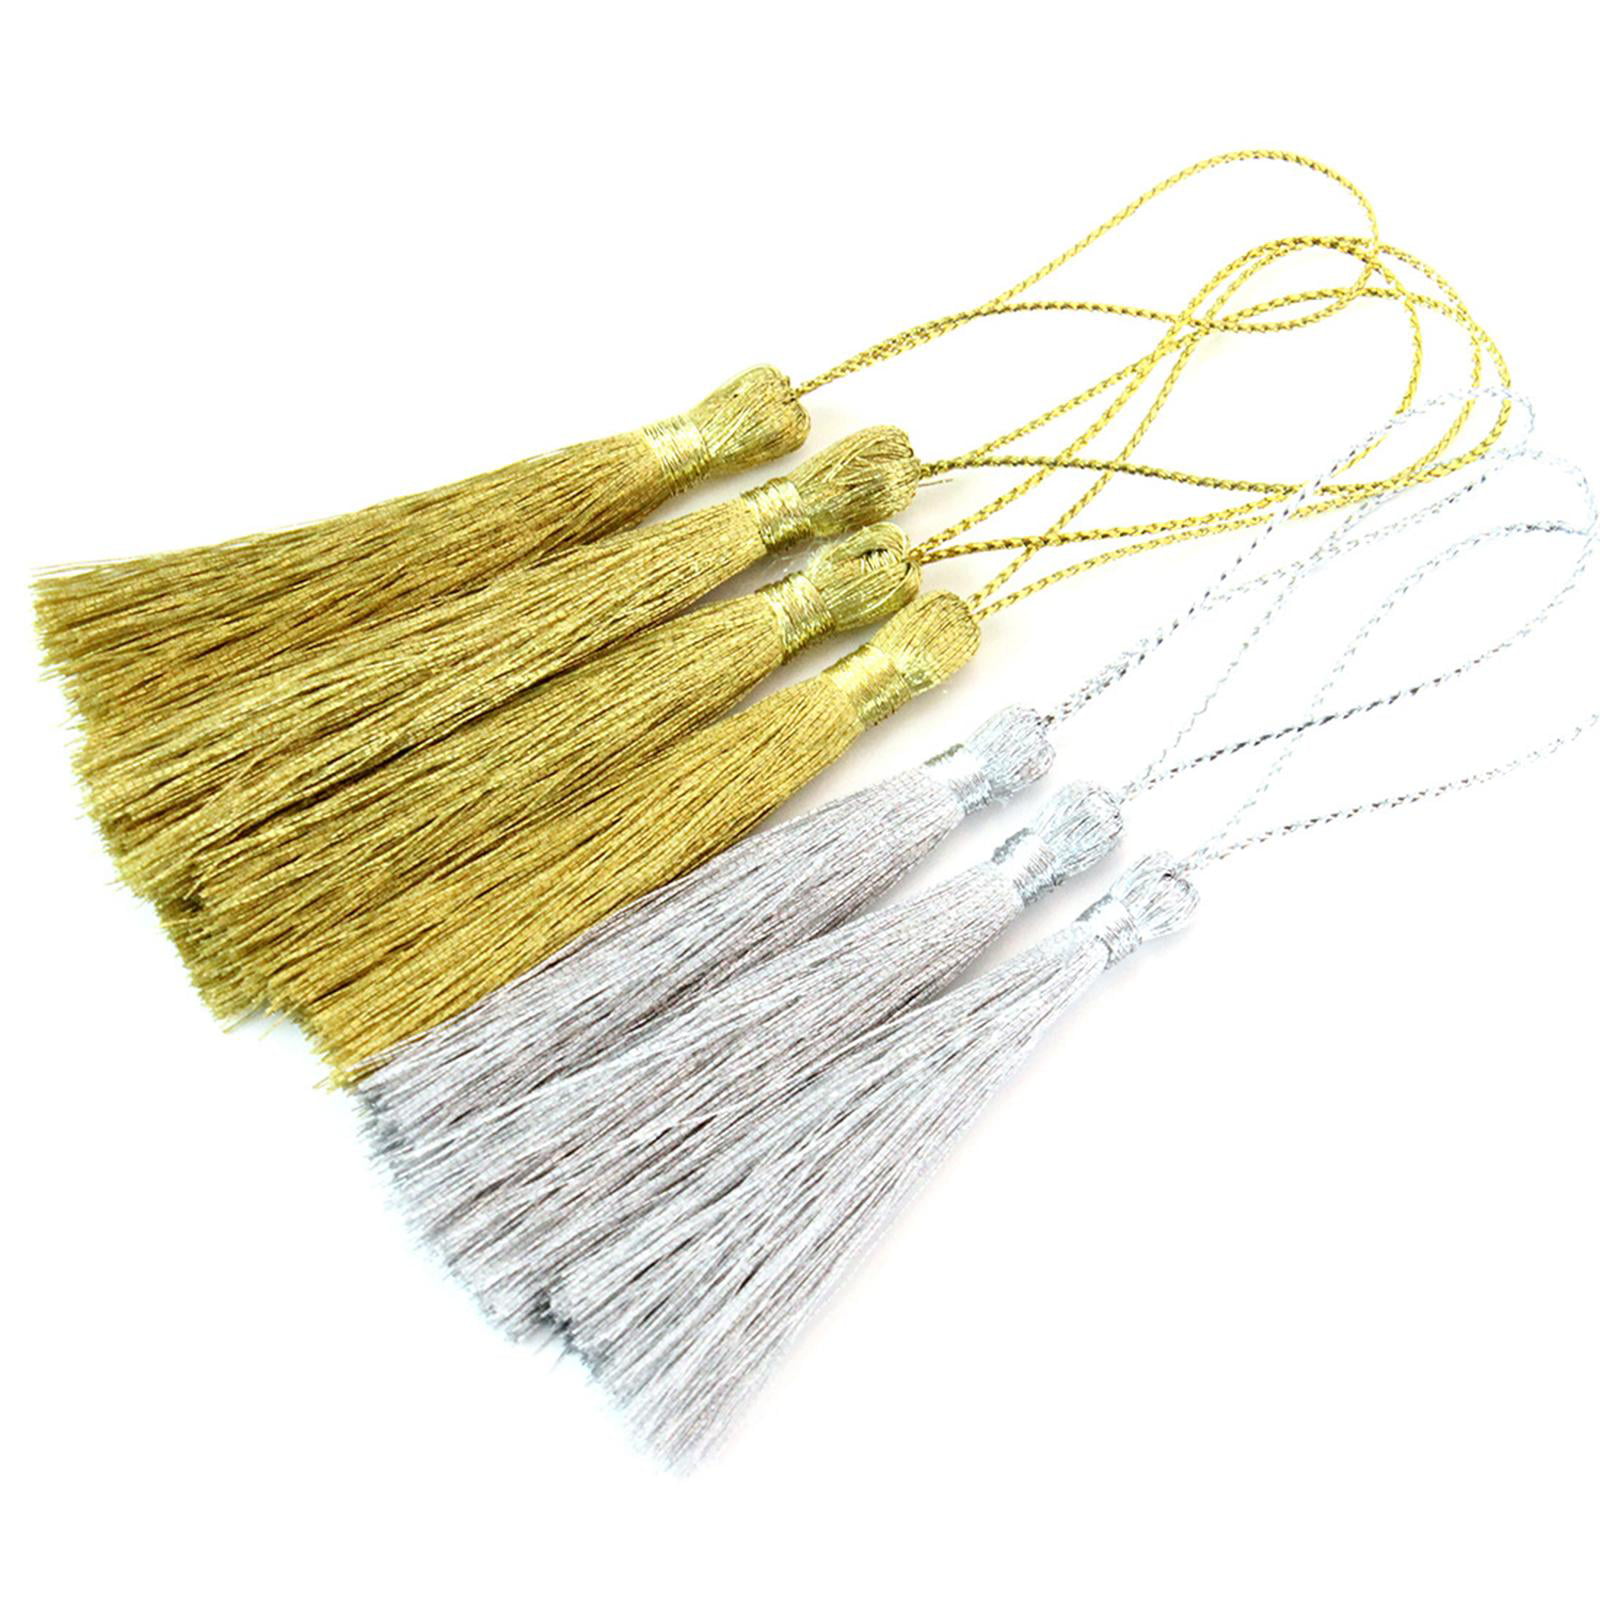 30pcs Silky Floss Bookmark Tassels Cord Loop Chinese Knot for Jewelry Making 